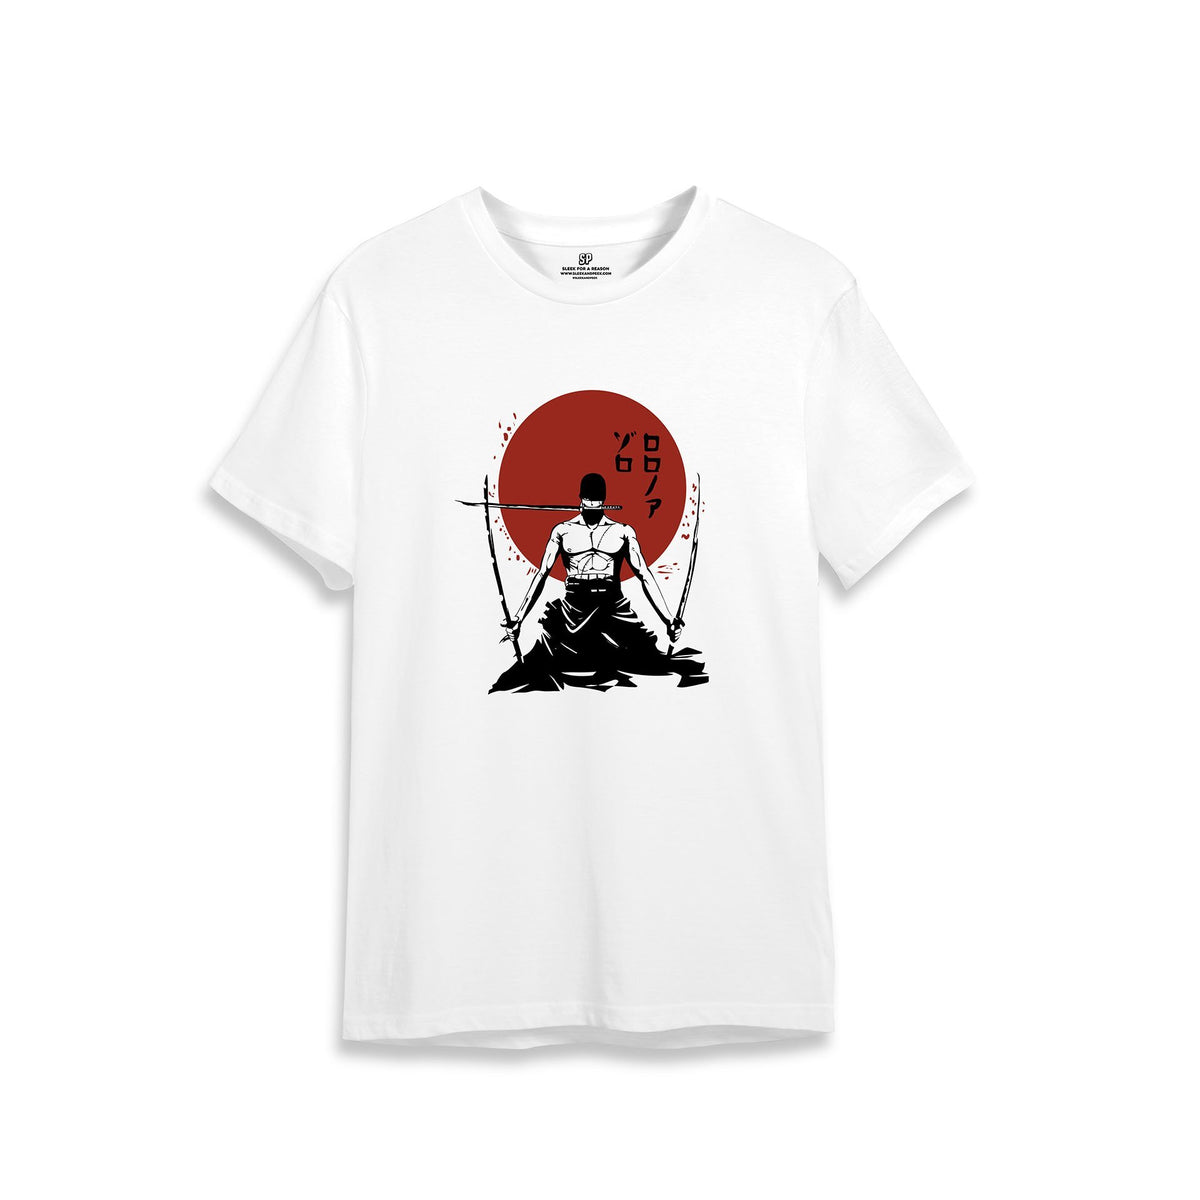 Buy One Piece T shirt Monkey D Luffy Anime T shirt Online India  Fans Army